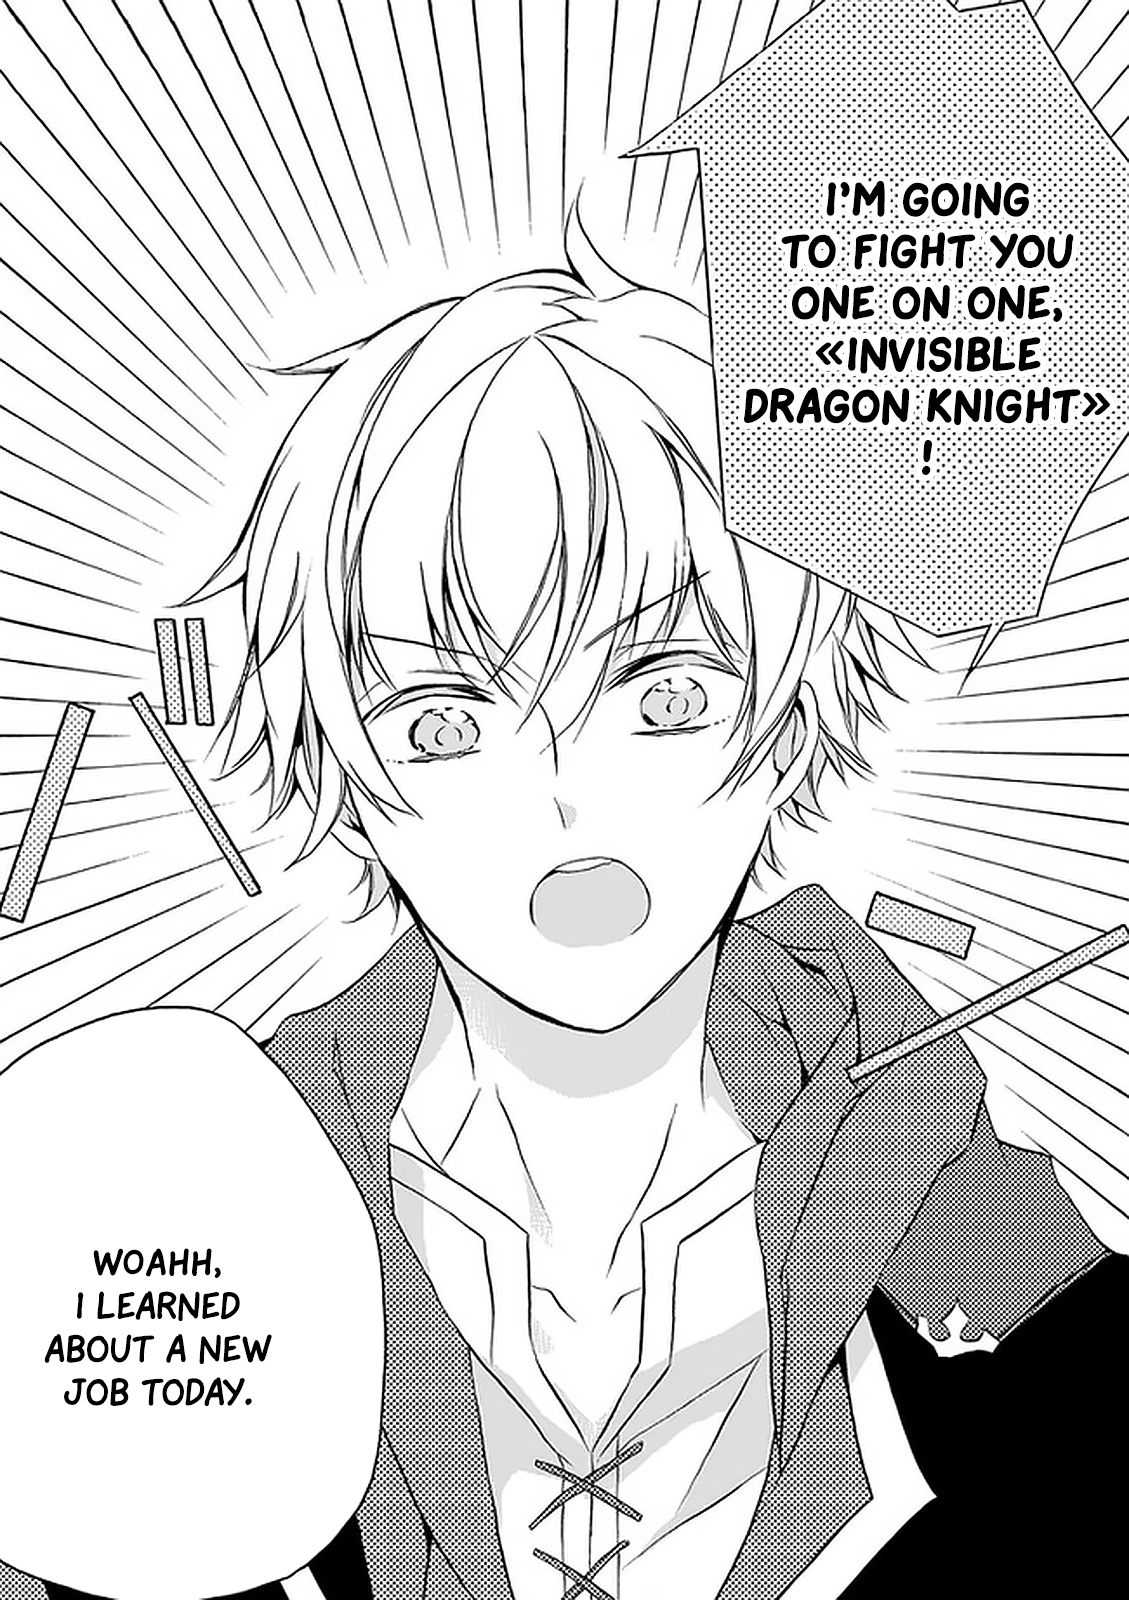 I went from the strongest job, <Dragon Knight>, to a beginner level job, <Carrier>, yet for some reason the Heroes rely on me Vol. 1 Ch. 2